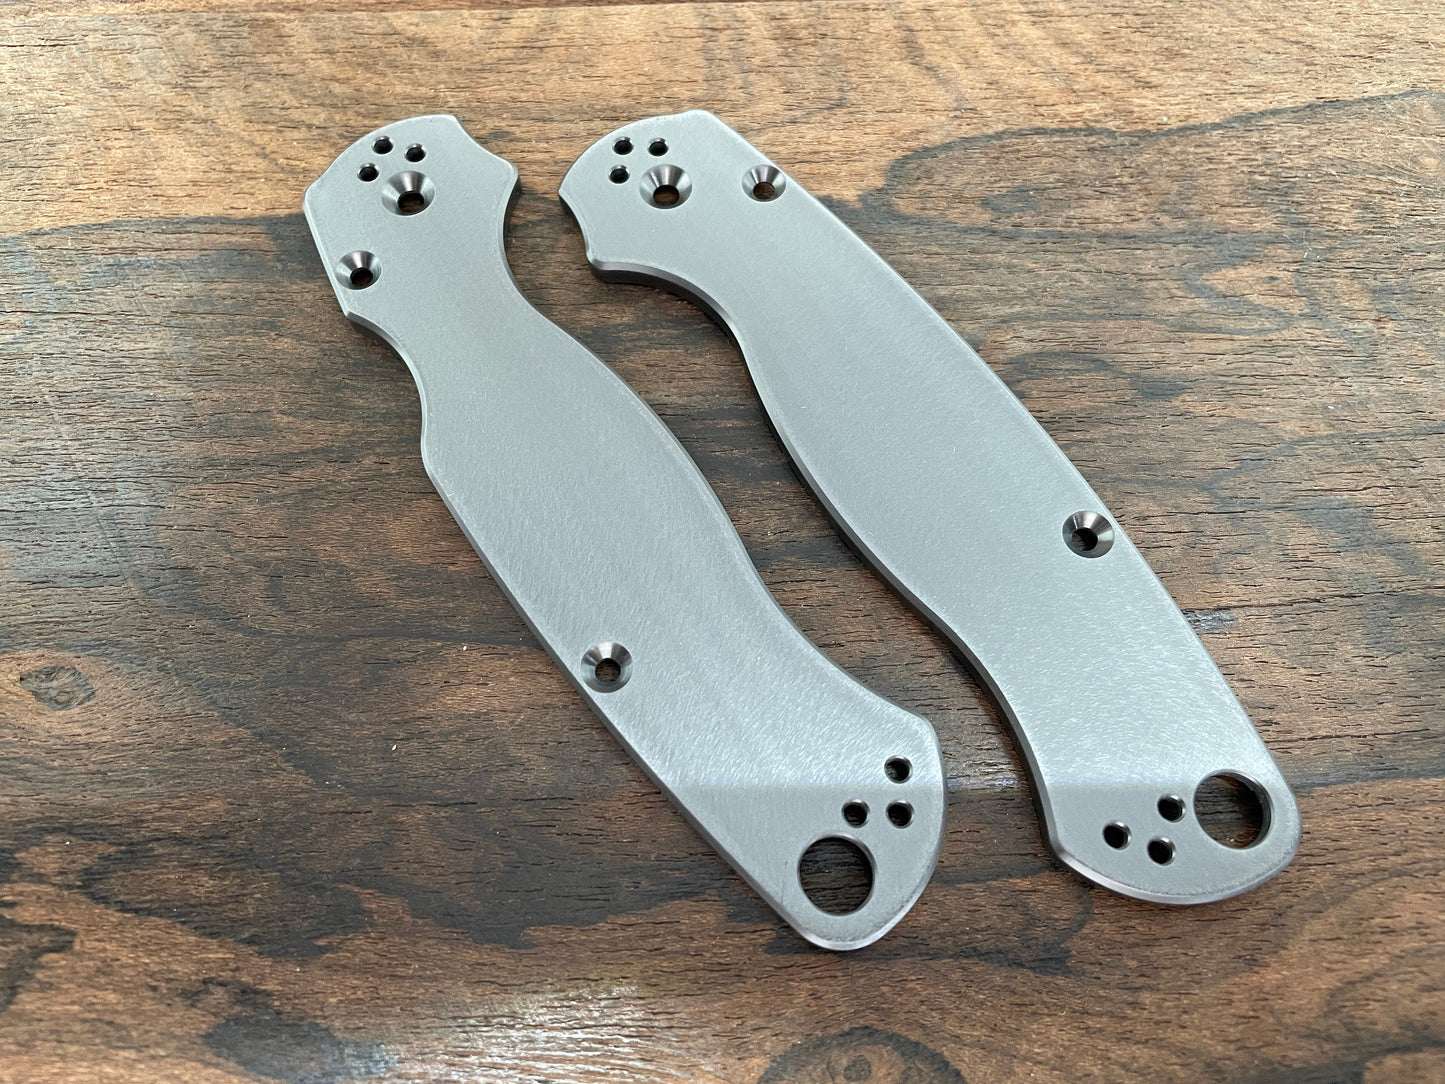 Deep Brushed black Zirconium scales for Spyderco Paramilitary 2 PM2